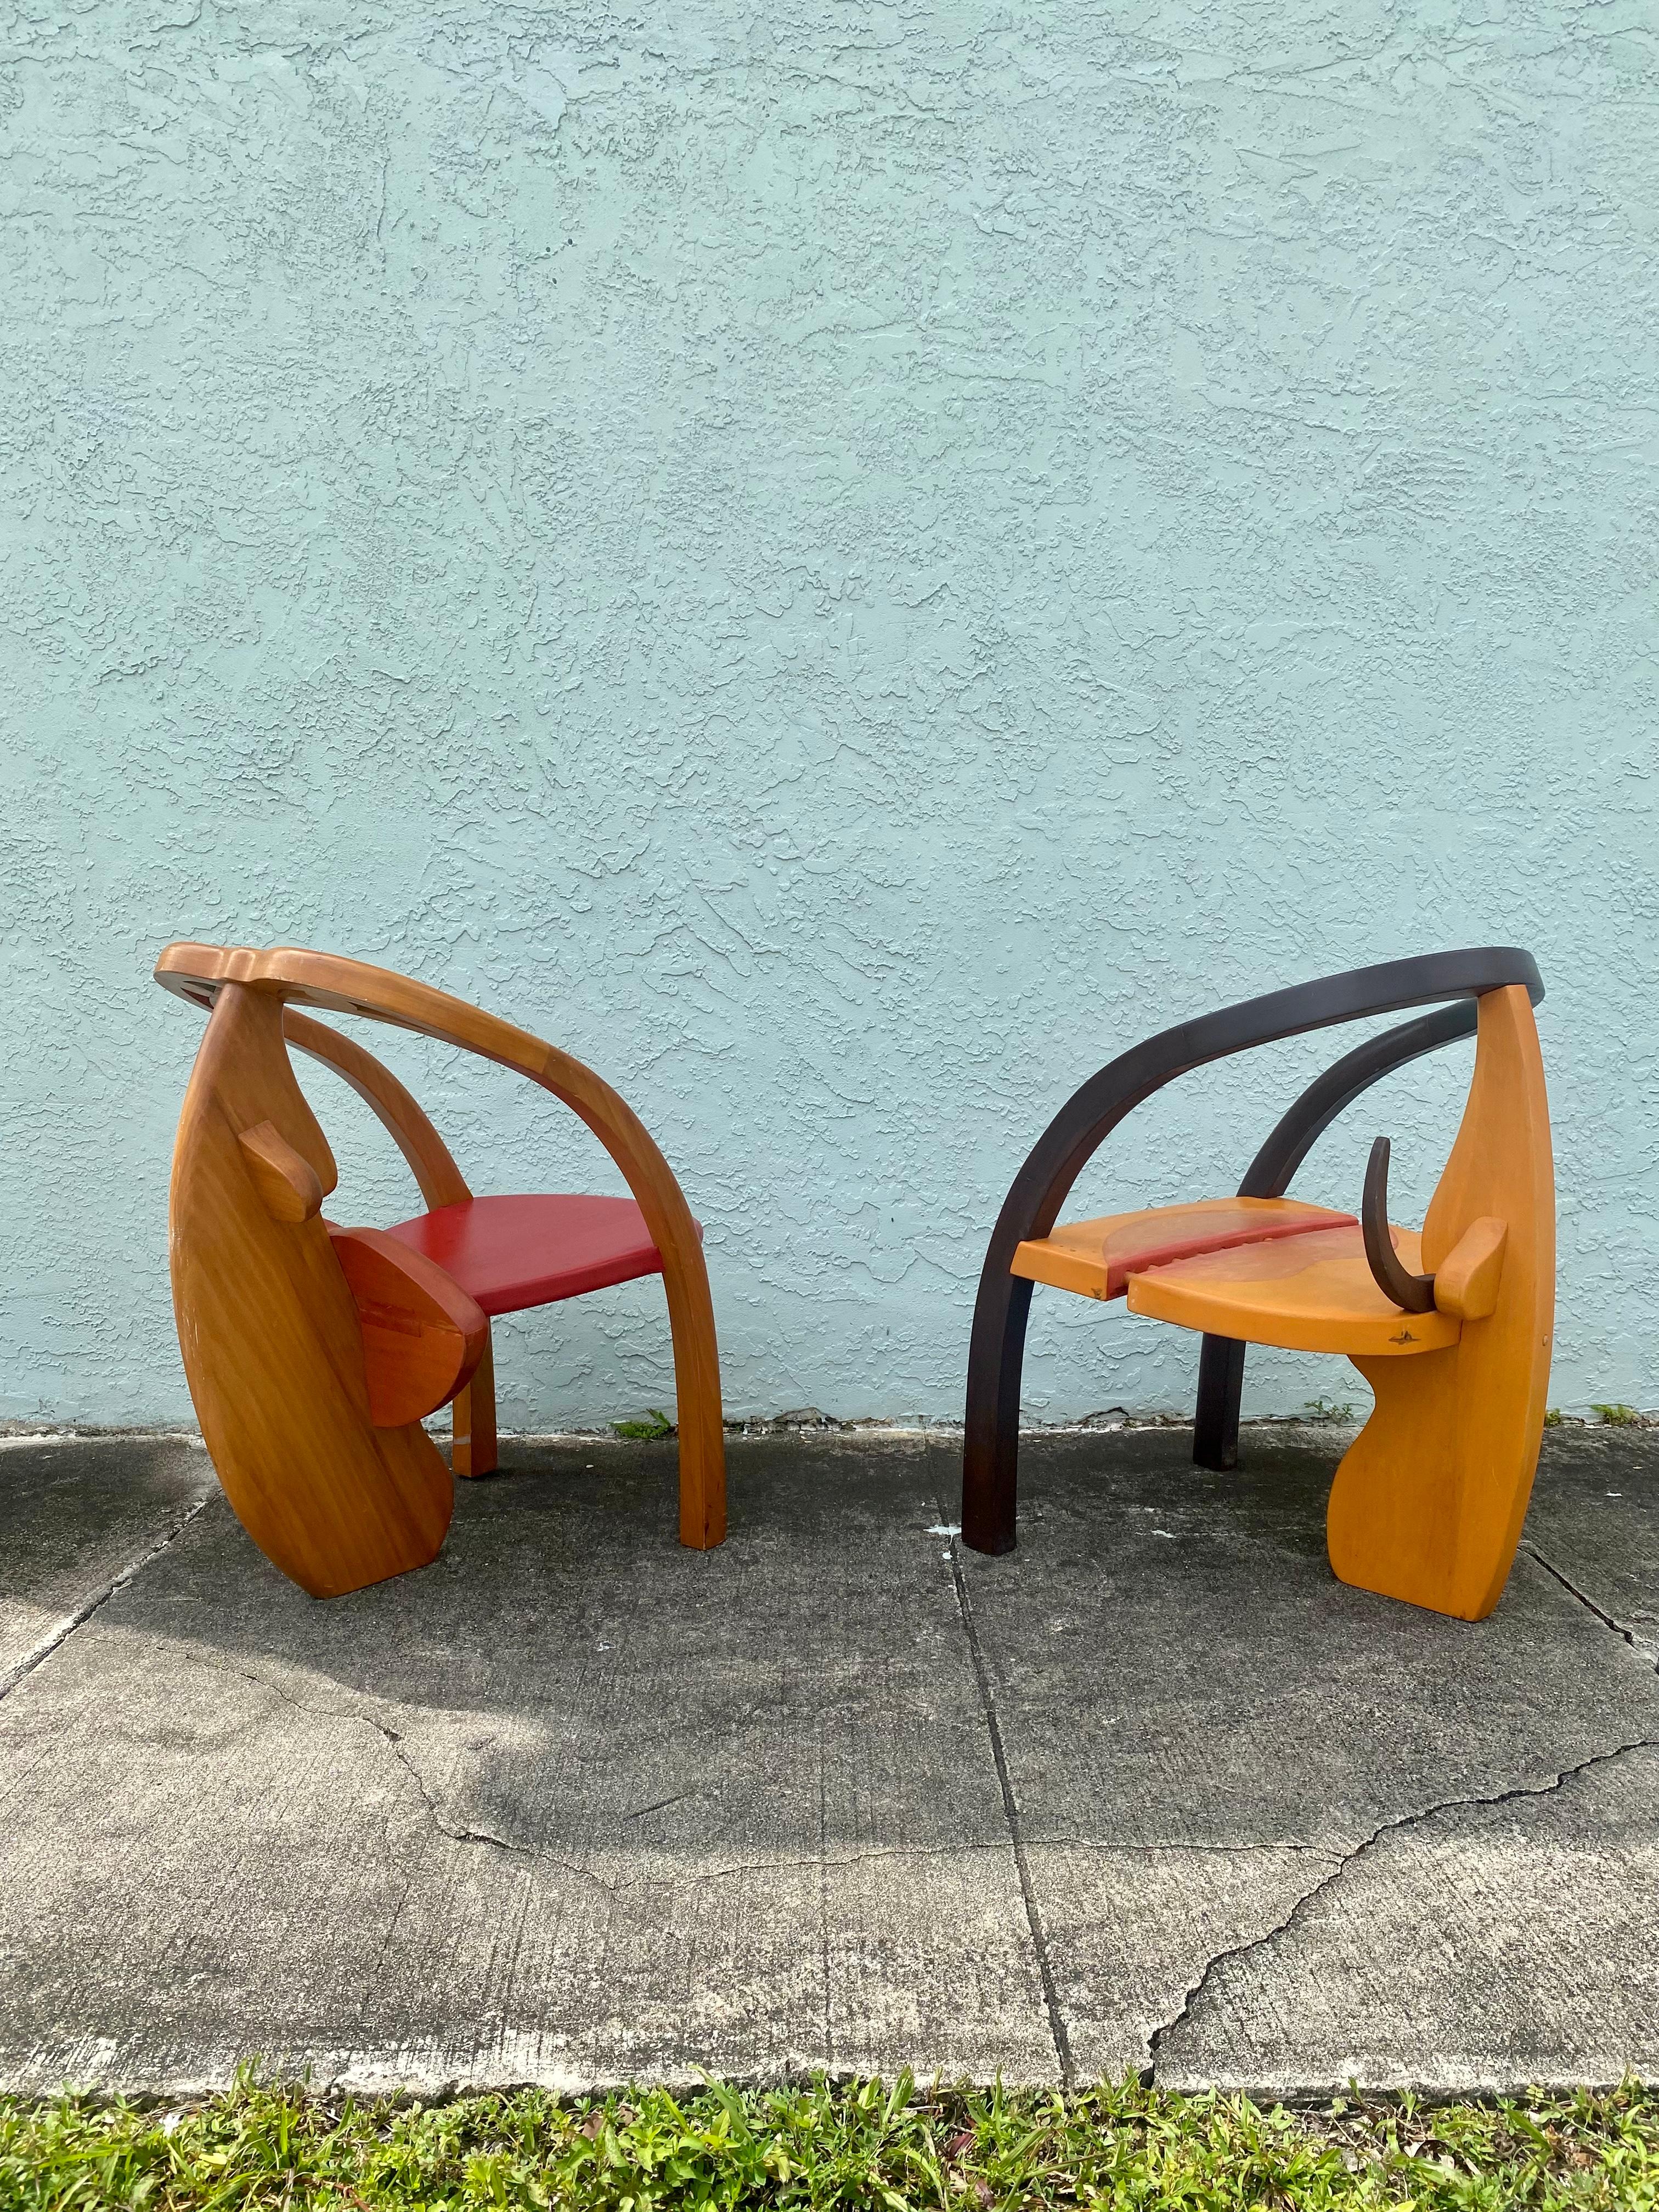 1960s Dali Style Artistic Sculptural Wood Figural Faces Folk Art Chair, Set of 2 In Good Condition For Sale In Fort Lauderdale, FL